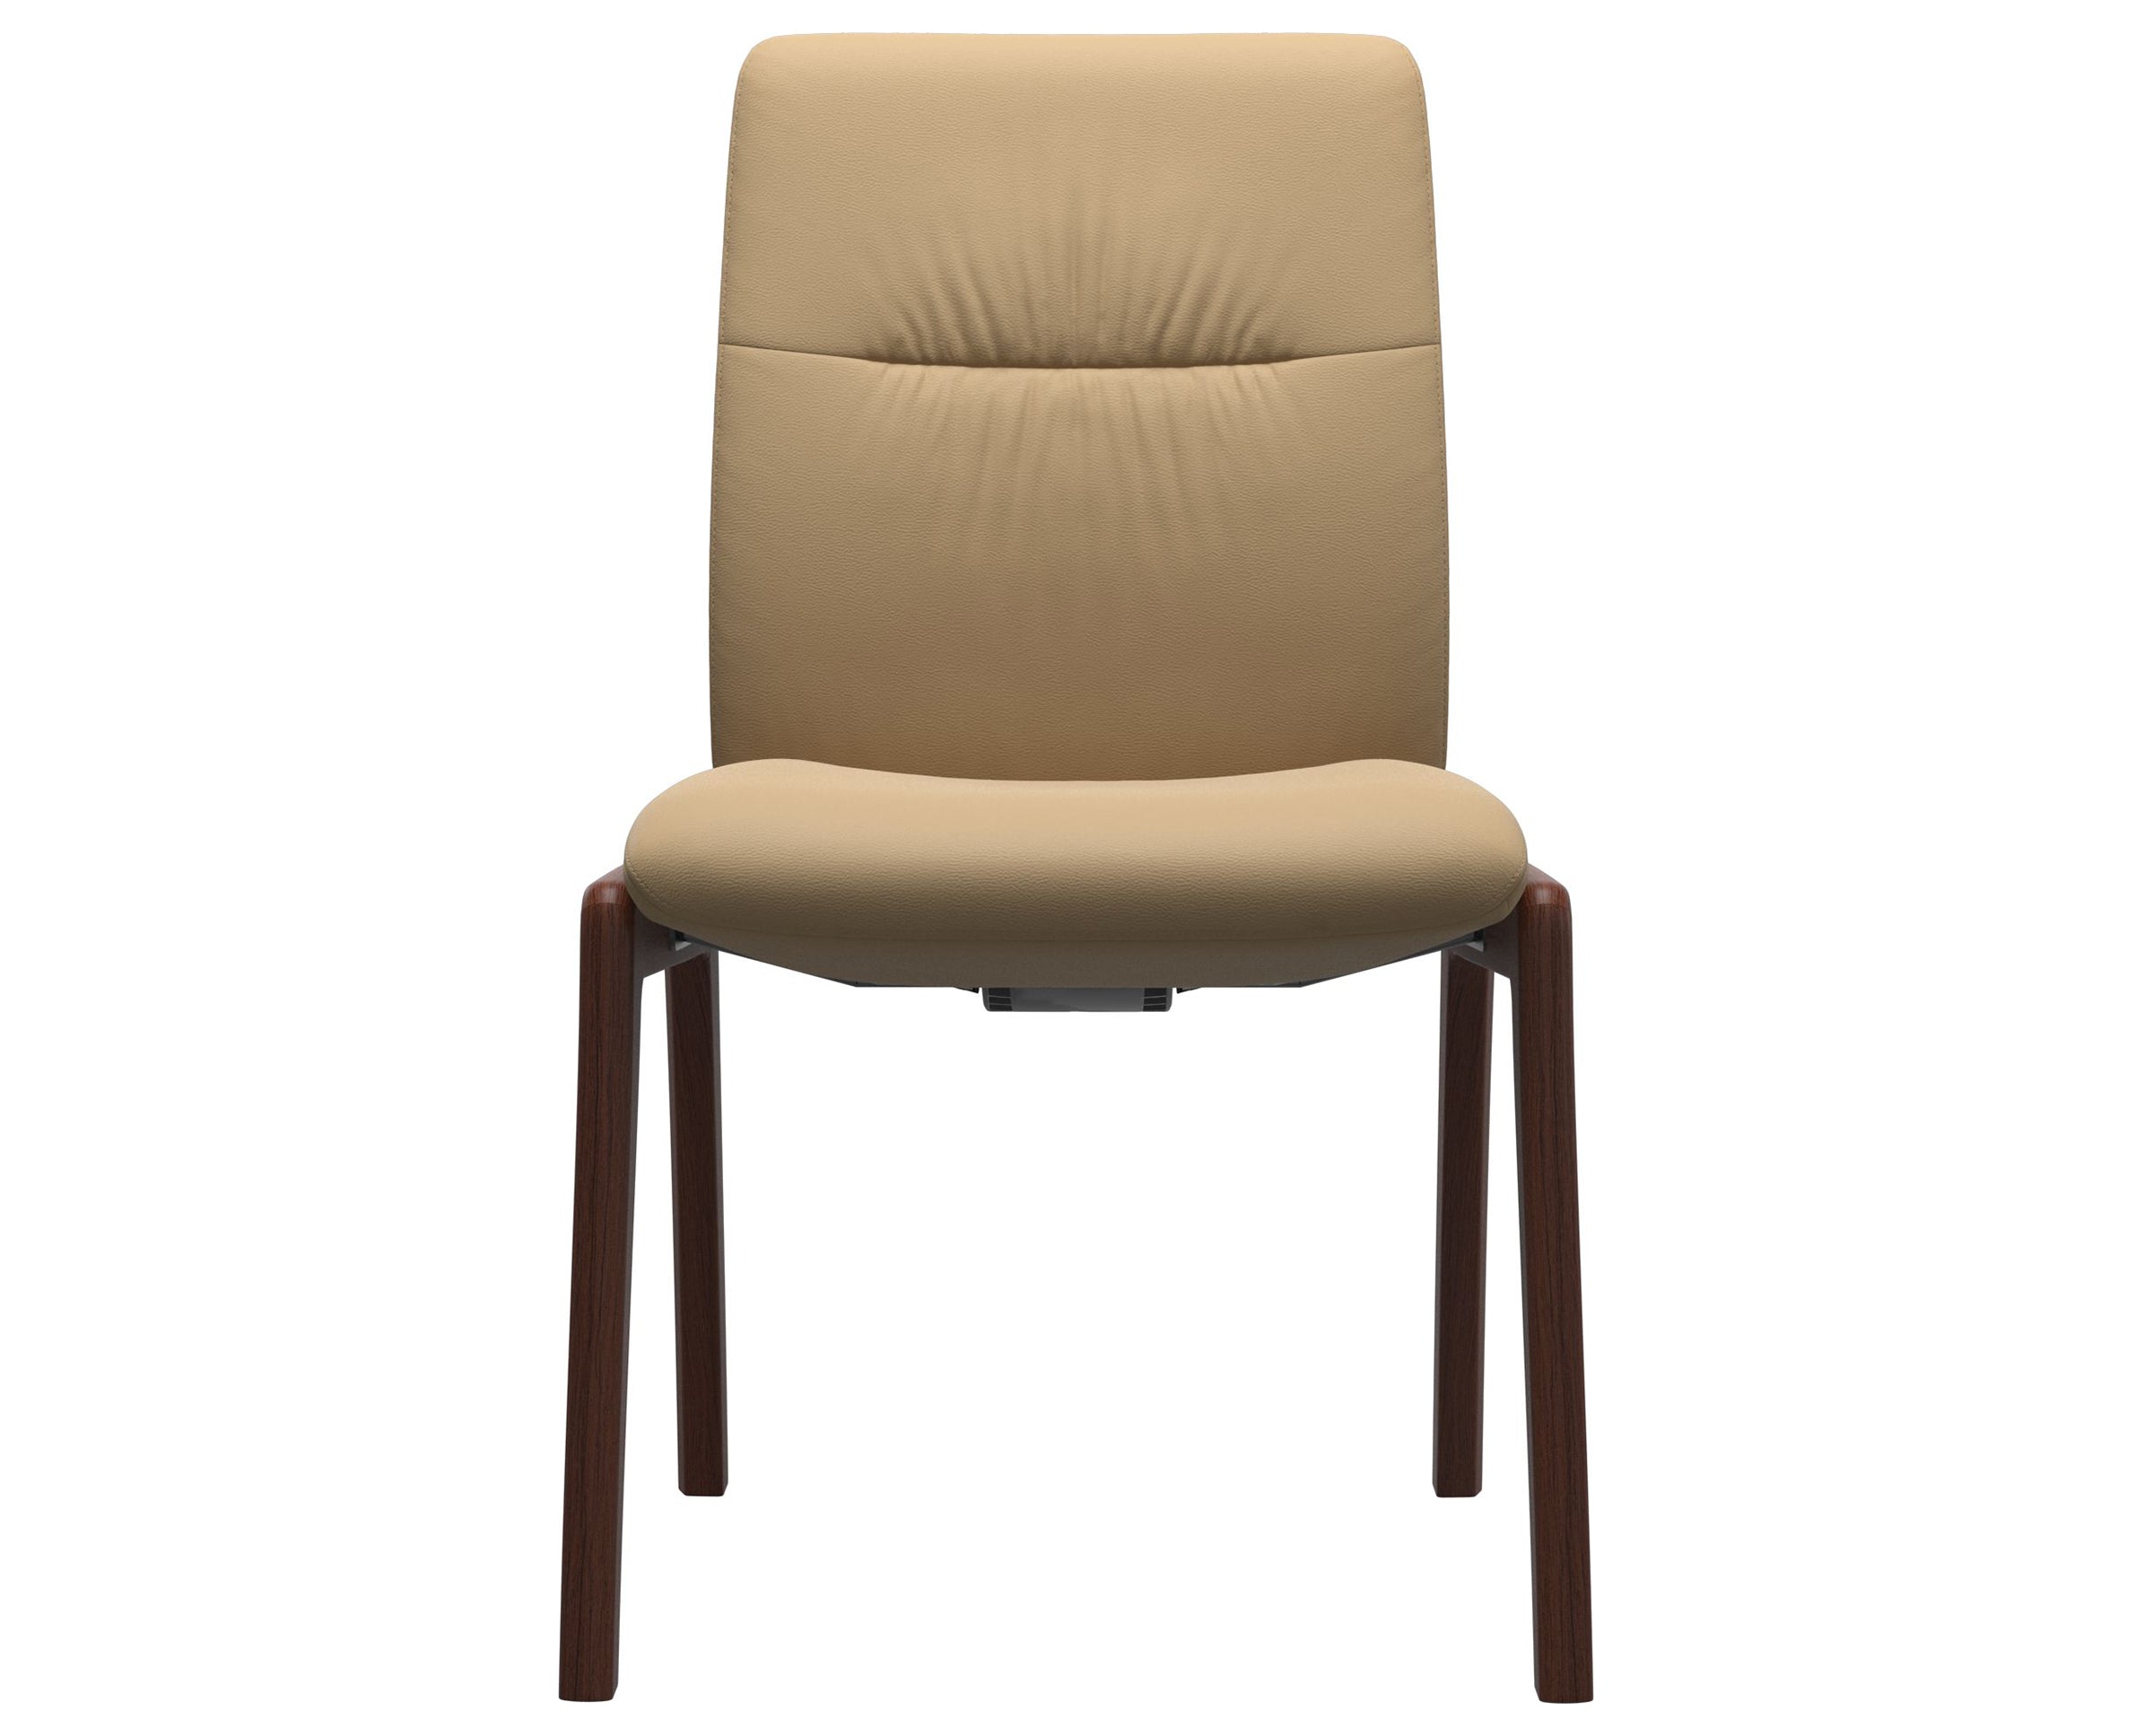 Paloma Leather Sand and Walnut Base | Stressless Mint Low Back D100 Dining Chair | Valley Ridge Furniture